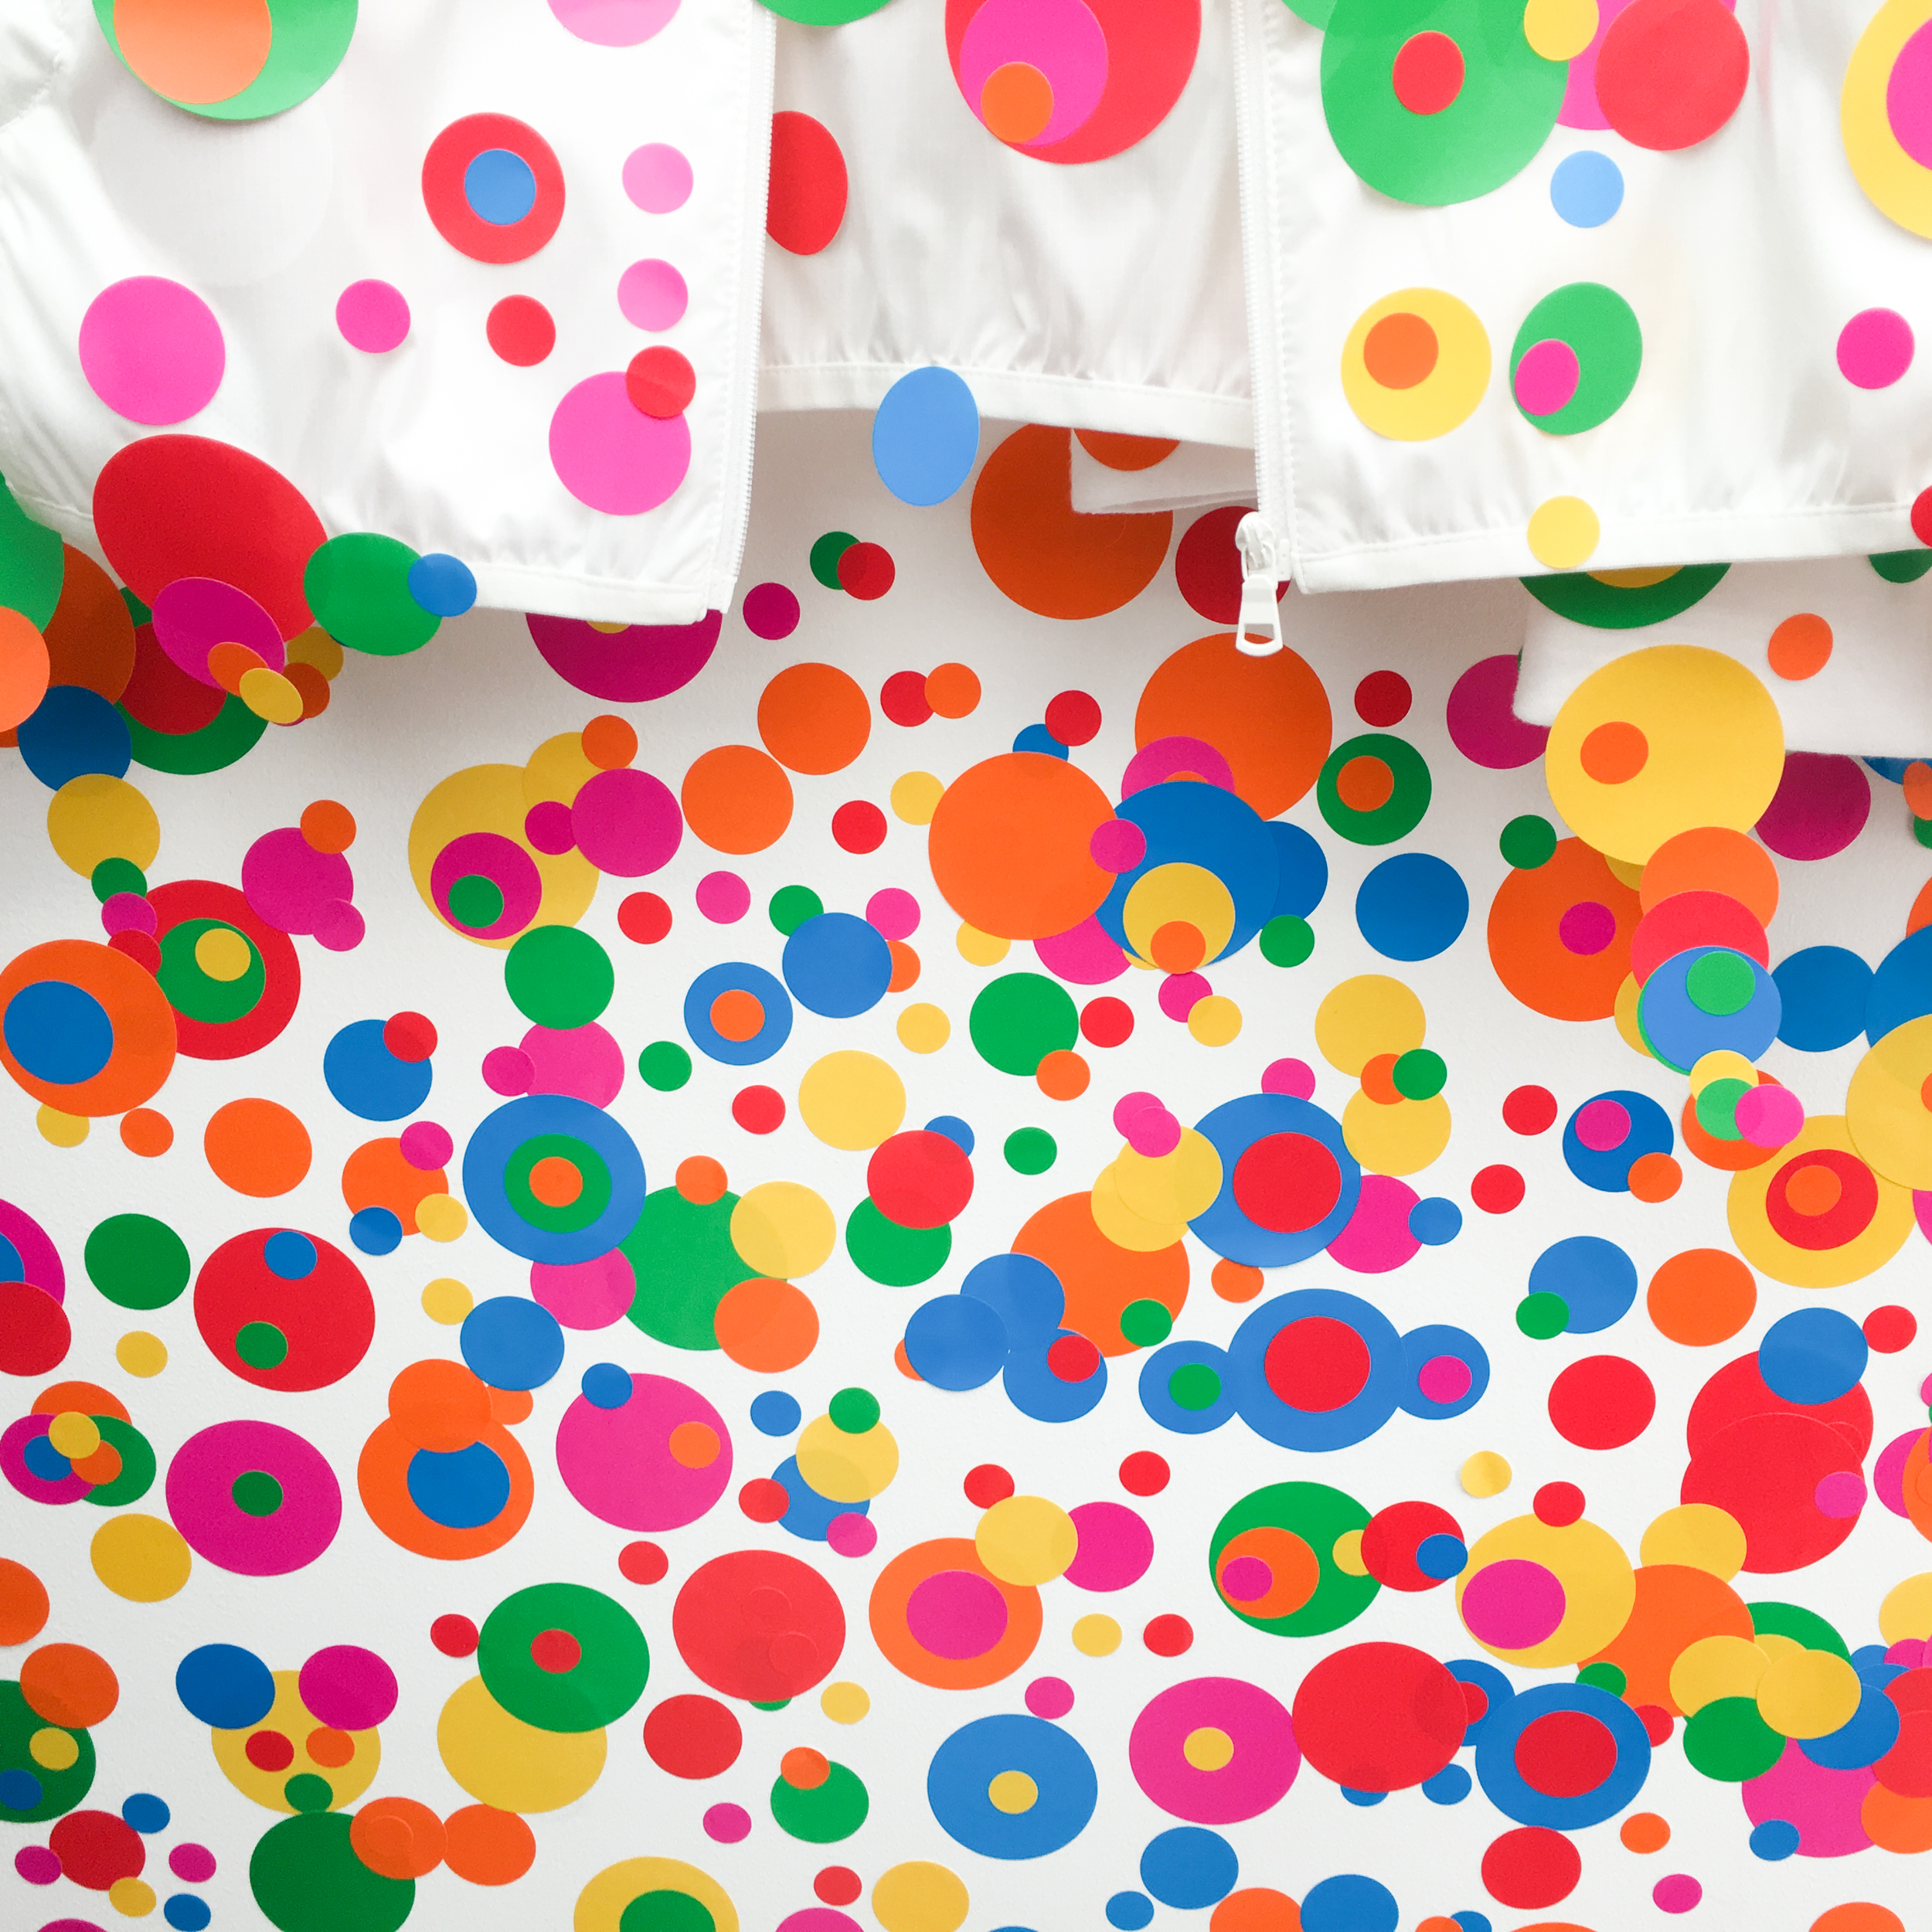 close up of the polka dot sticker room